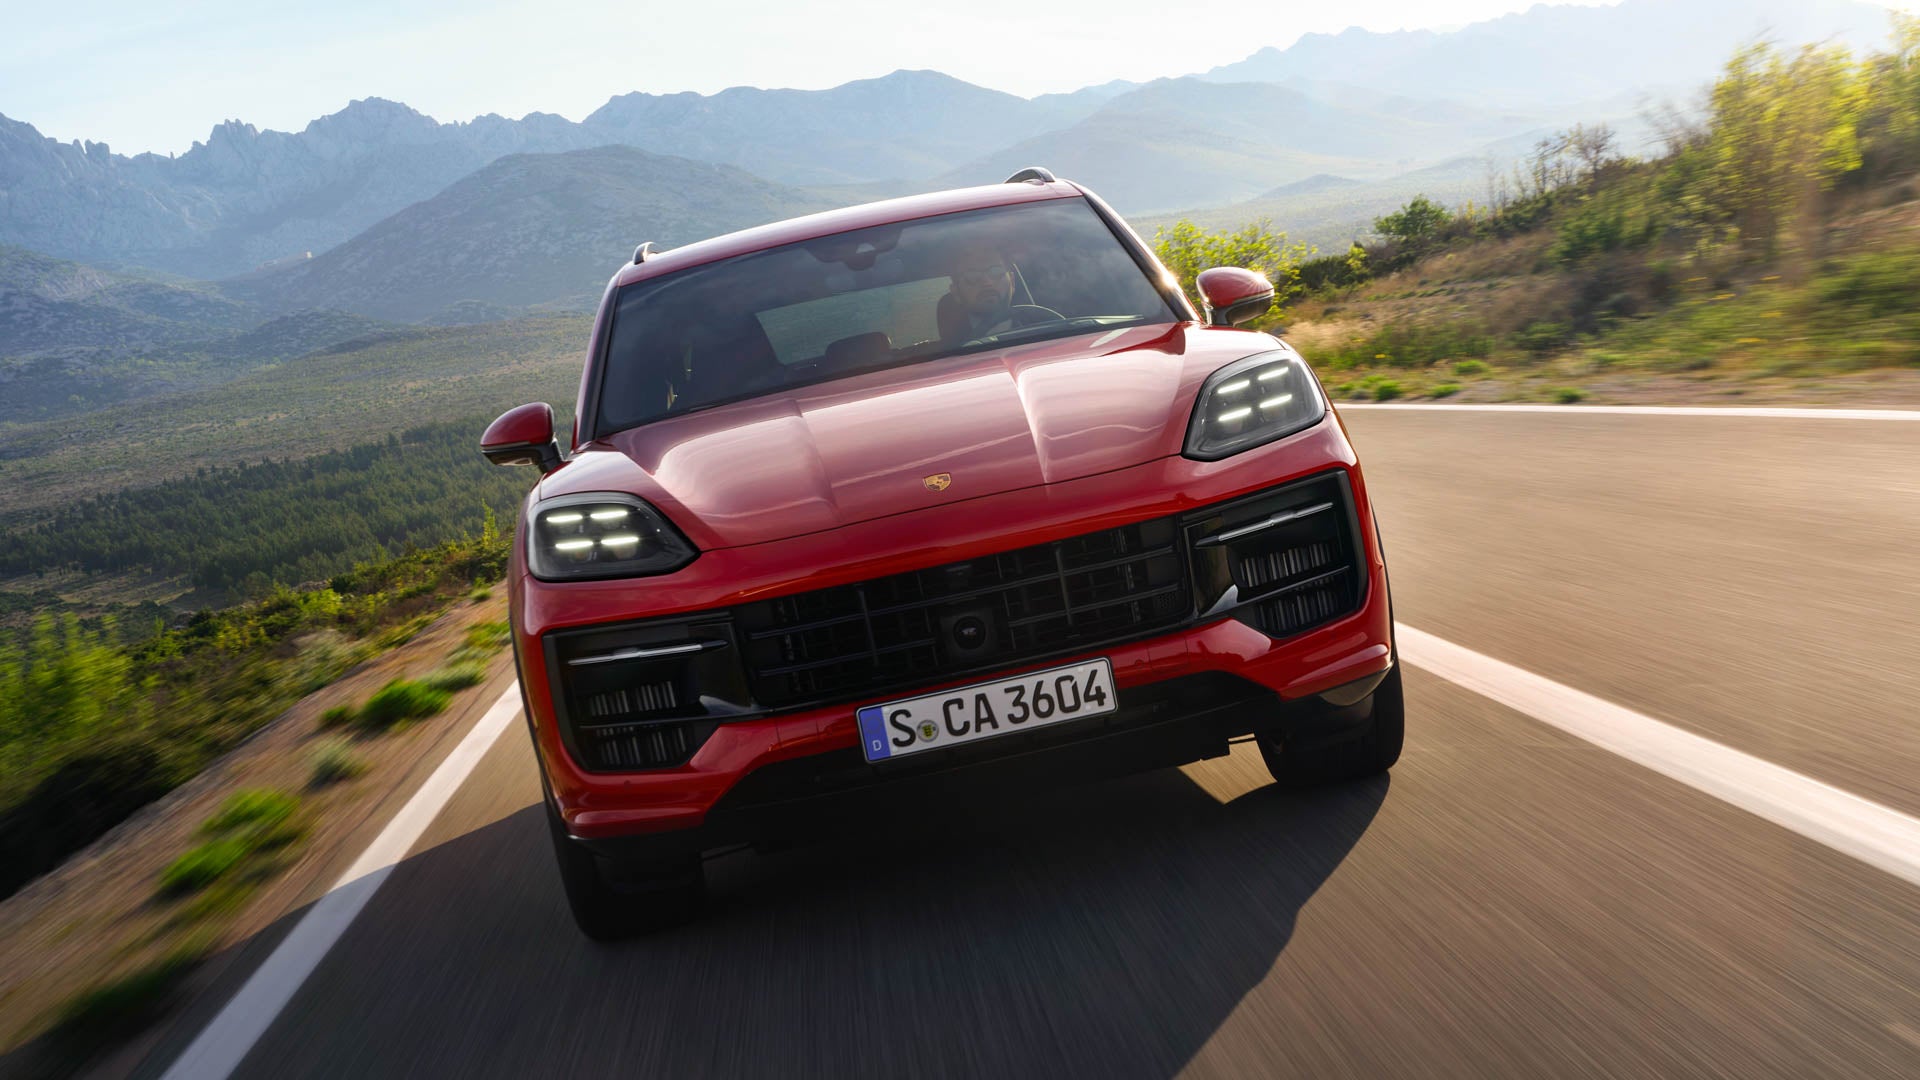 The 2025 Porsche Cayenne GTS is positioned as the ideal choice with 493 horsepower